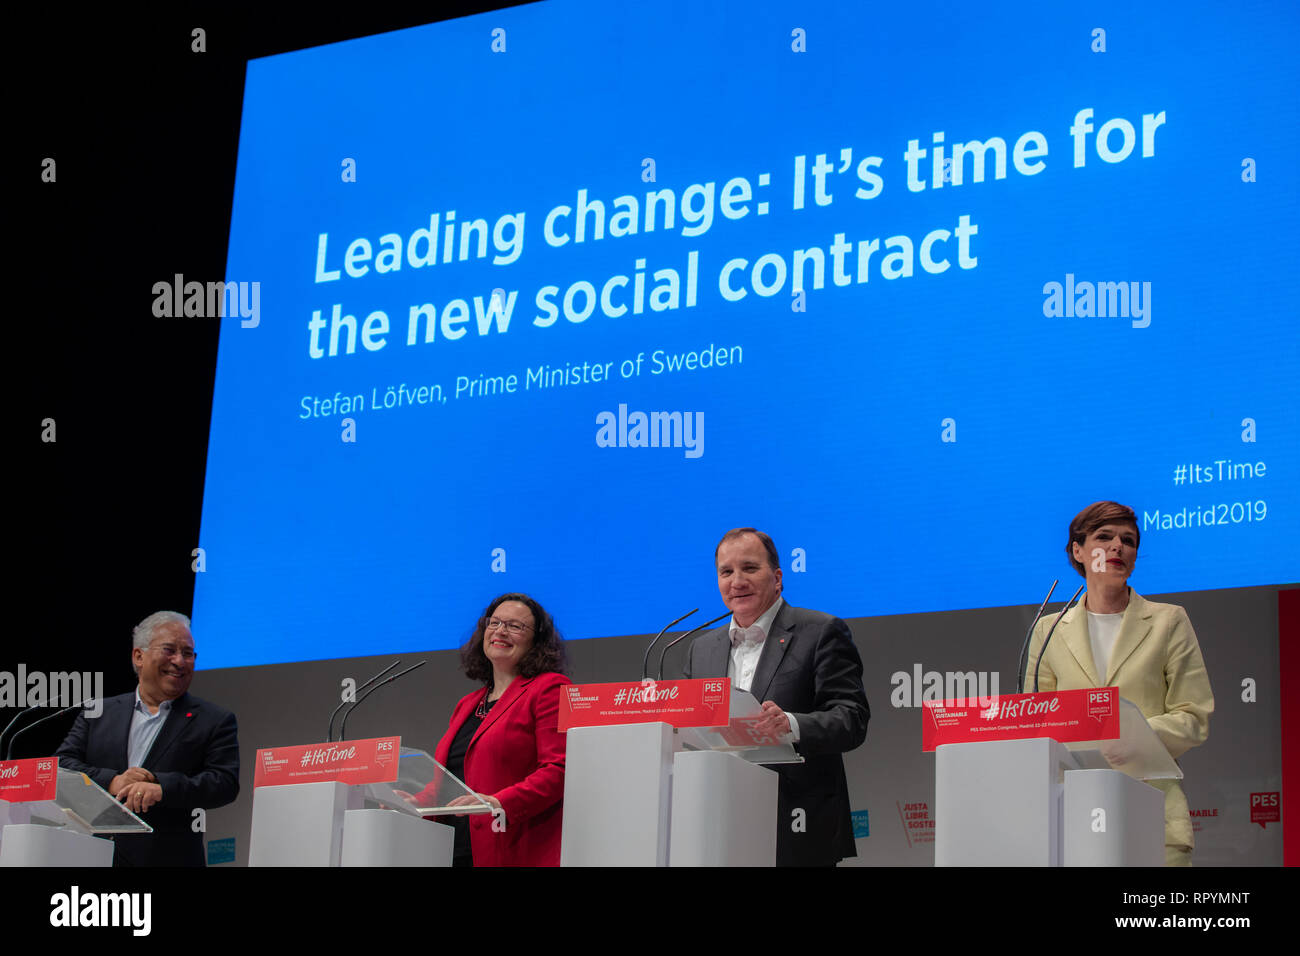 Madrid, Spain. 23rd February, 2019. António Costa(L), Prime Minister of Portugal, Andrea Nahles(LC), SPD Leader, Germany, Stefan Löfven(RC), Prime Minister of Sweden and Pamela Rendi-Wagner(R), SPÖ Leader, Austria attending Congress European Socialist Party (PES) in Madrid Credit: Jesús Hellin/Alamy Live News Stock Photo